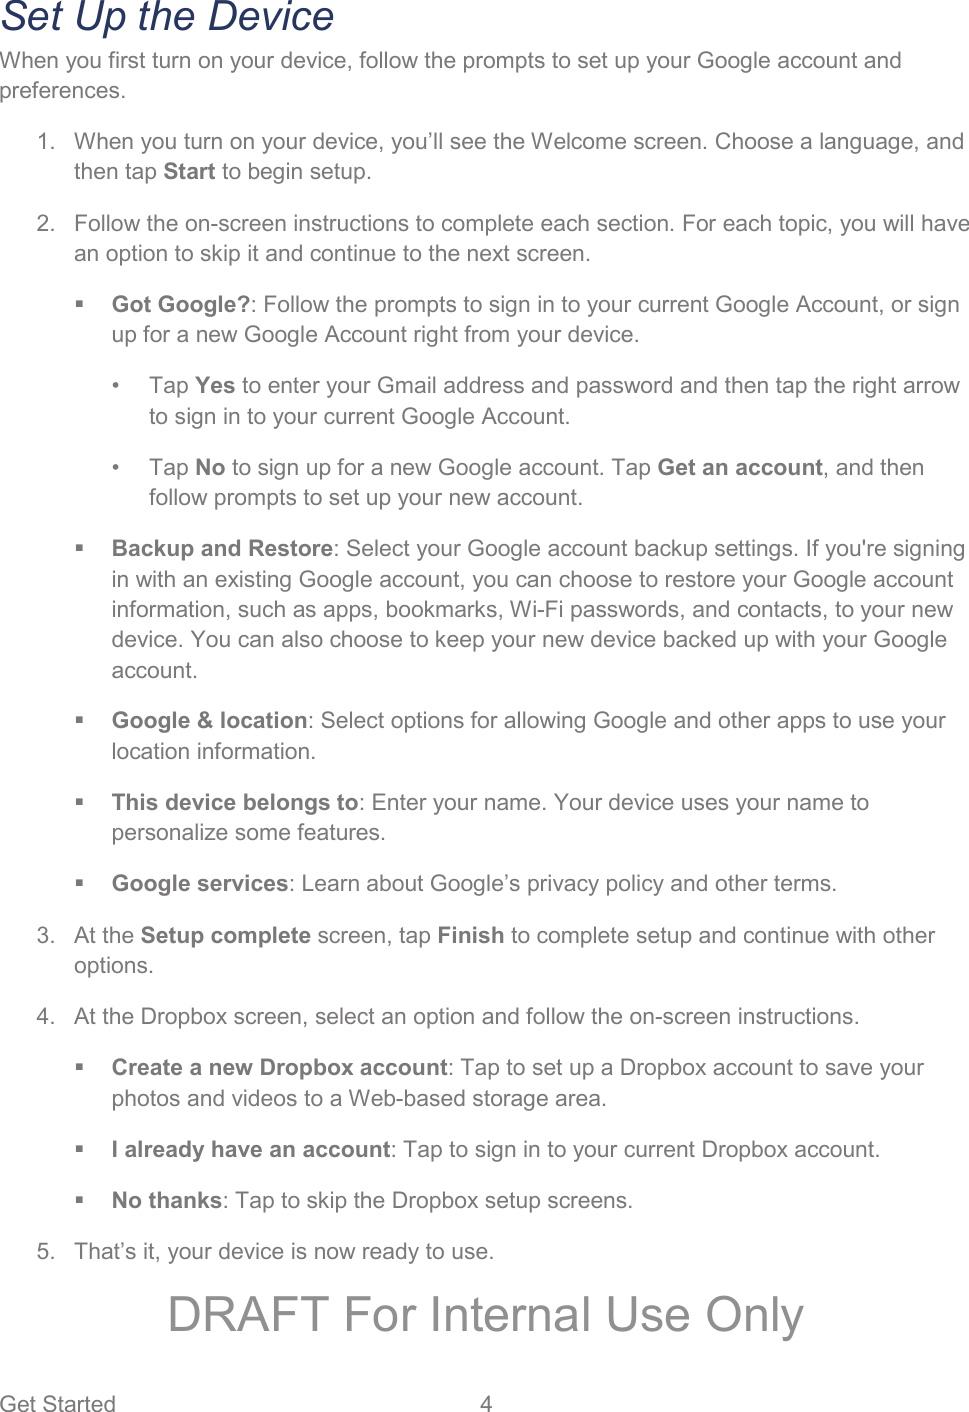 Get Started  4   Set Up the Device When you first turn on your device, follow the prompts to set up your Google account and preferences.   When you turn on your device, you’ll see the Welcome screen. Choose a language, and 1.then tap Start to begin setup.   Follow the on-screen instructions to complete each section. For each topic, you will have 2.an option to skip it and continue to the next screen.  Got Google?: Follow the prompts to sign in to your current Google Account, or sign up for a new Google Account right from your device.  • Tap Yes to enter your Gmail address and password and then tap the right arrow to sign in to your current Google Account. • Tap No to sign up for a new Google account. Tap Get an account, and then follow prompts to set up your new account.   Backup and Restore: Select your Google account backup settings. If you&apos;re signing in with an existing Google account, you can choose to restore your Google account information, such as apps, bookmarks, Wi-Fi passwords, and contacts, to your new device. You can also choose to keep your new device backed up with your Google account.  Google &amp; location: Select options for allowing Google and other apps to use your location information.   This device belongs to: Enter your name. Your device uses your name to personalize some features.  Google services: Learn about Google’s privacy policy and other terms.  At the Setup complete screen, tap Finish to complete setup and continue with other 3.options.   At the Dropbox screen, select an option and follow the on-screen instructions. 4. Create a new Dropbox account: Tap to set up a Dropbox account to save your photos and videos to a Web-based storage area.   I already have an account: Tap to sign in to your current Dropbox account.   No thanks: Tap to skip the Dropbox setup screens.   That’s it, your device is now ready to use. 5.DRAFT For Internal Use Only